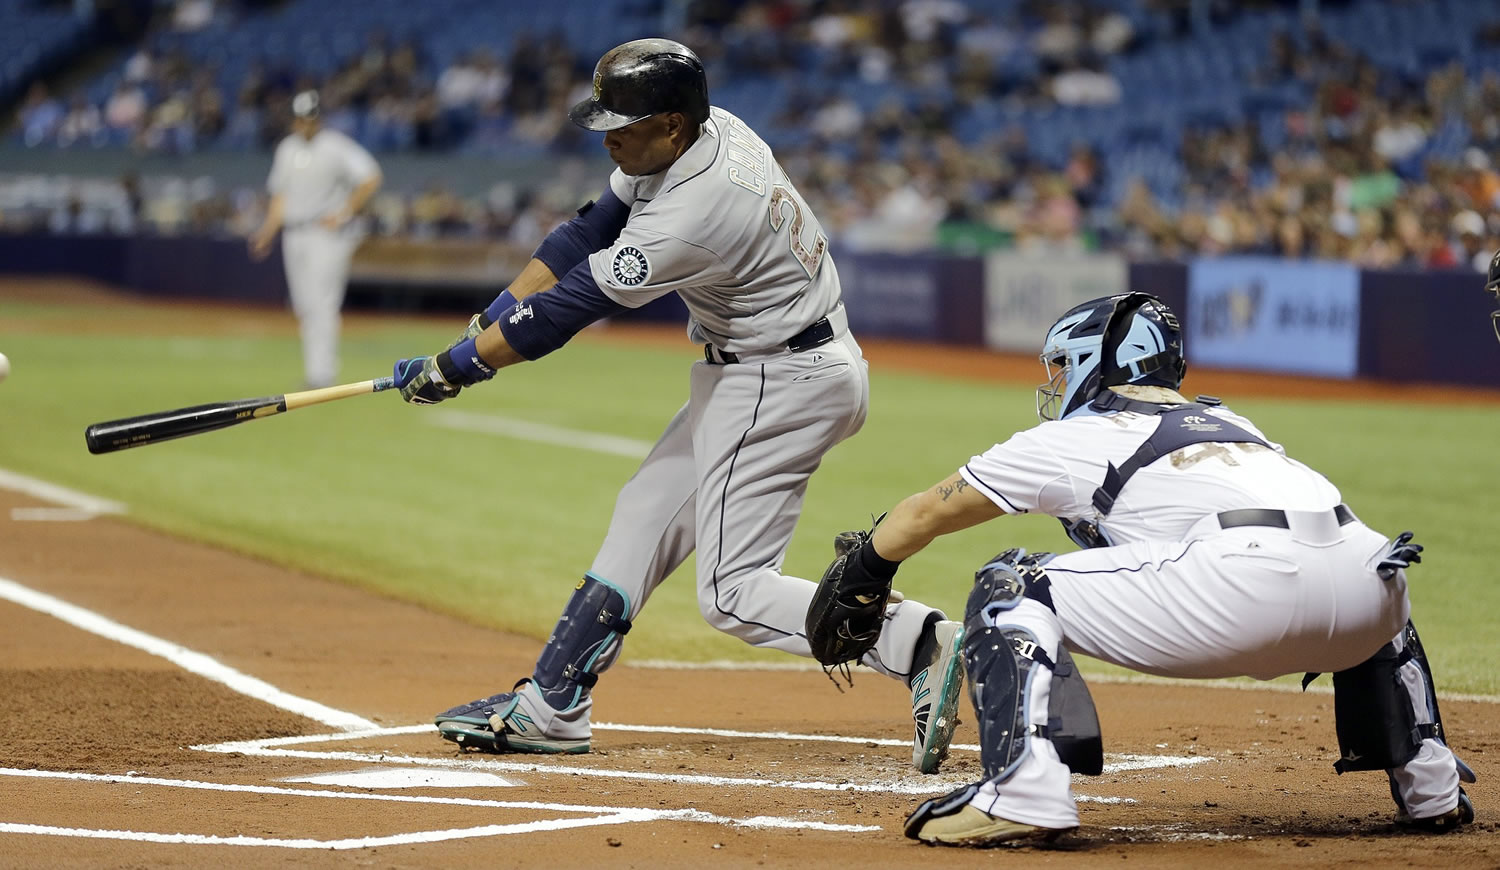 Seattle Mariners' Robinson Cano, left, lines an RBI single off Tampa Bay Rays starting pitcher Jake Odorizzi during the first inning Monday, May 25, 2015, in St. Petersburg, Fla. Mariners' Seth Smith scored on the hit.